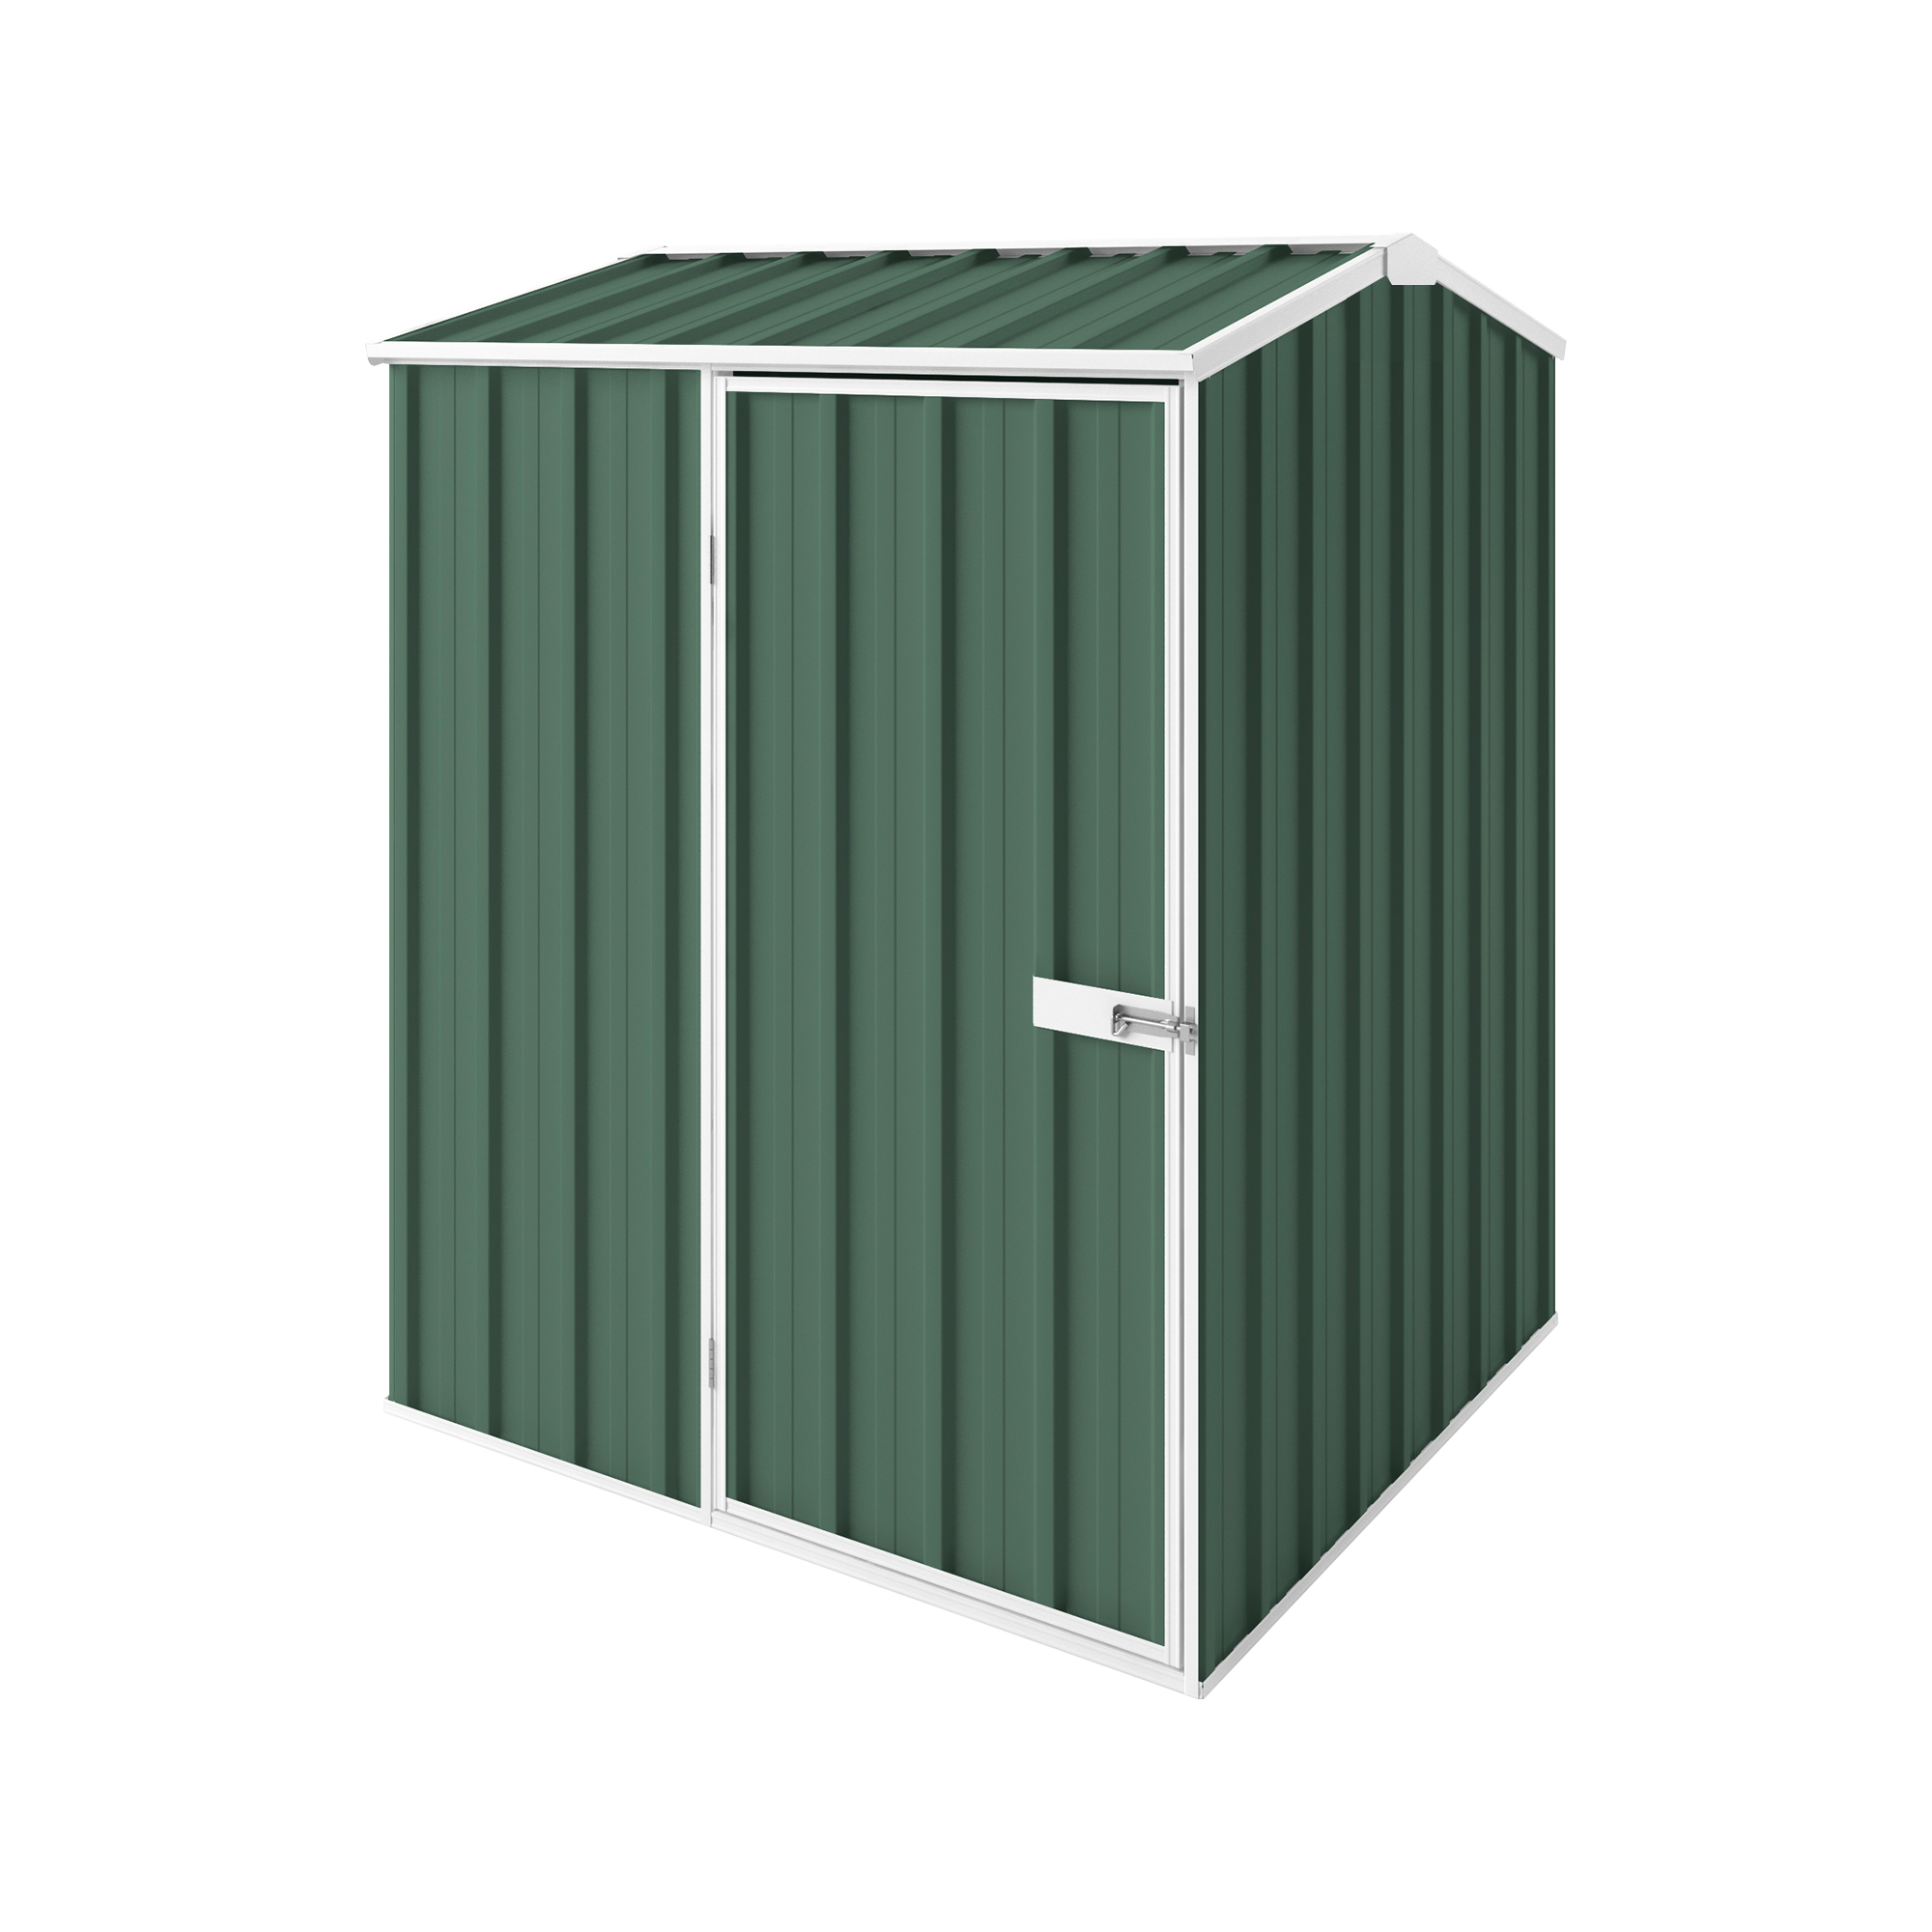 1.5m x 1.5m Gable Roof Garden Shed - EasyShed